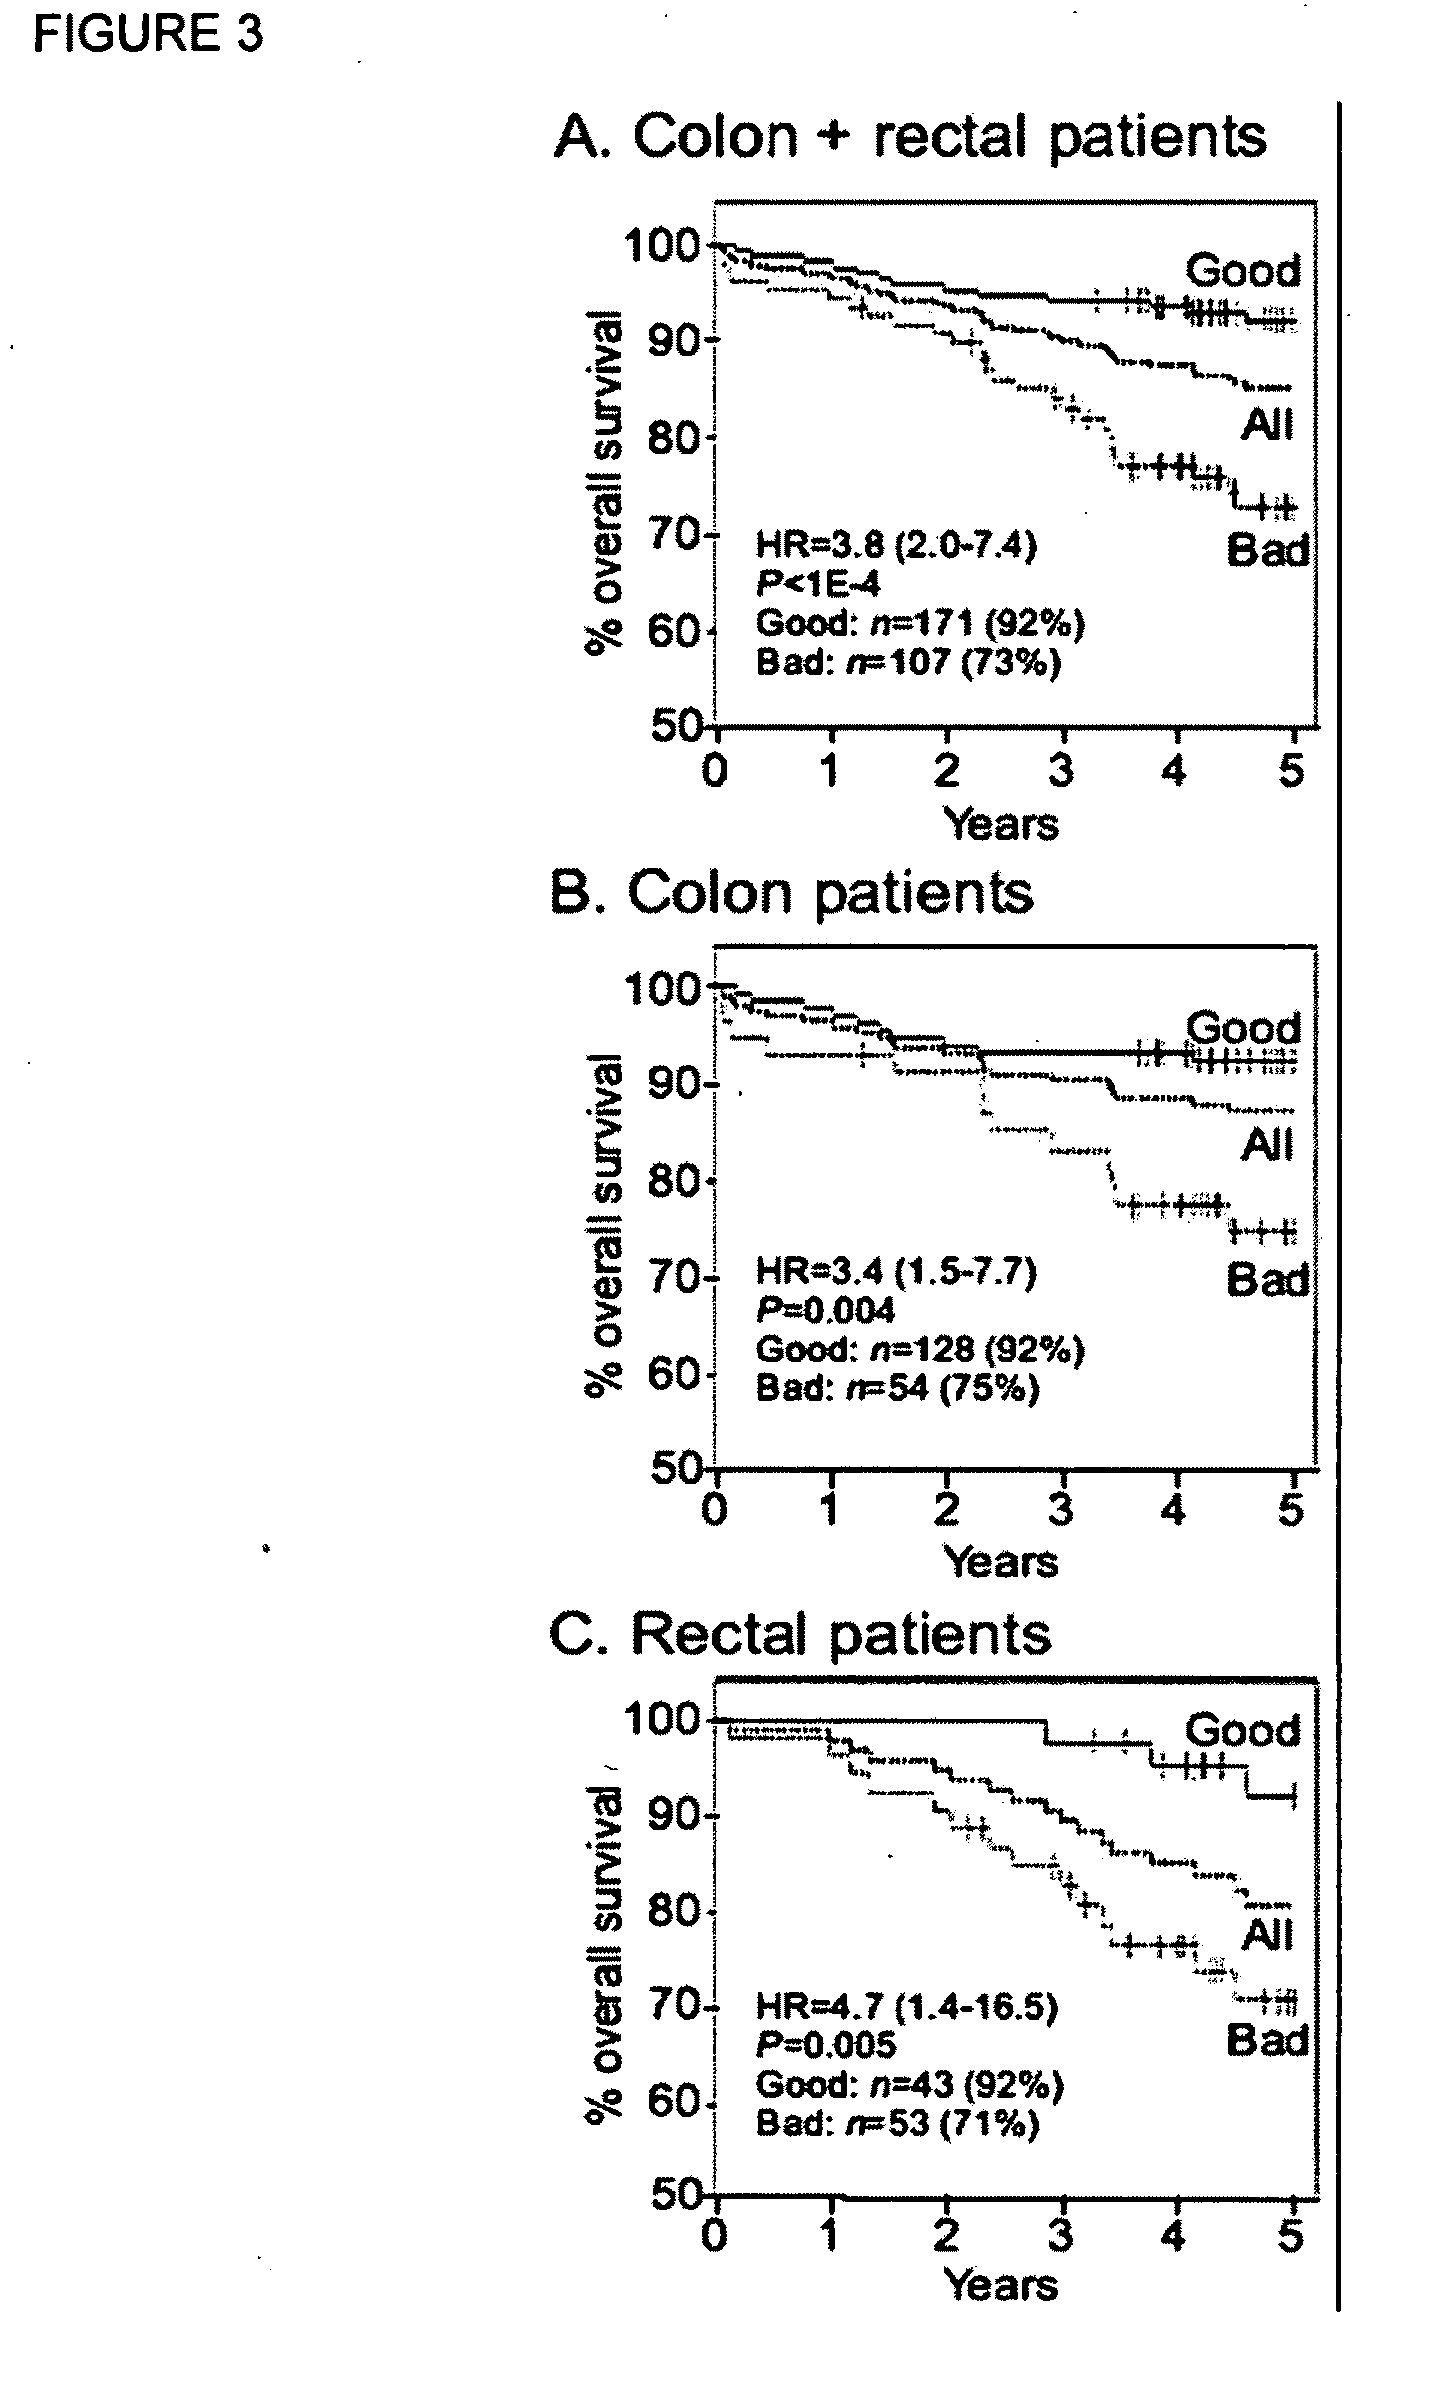 Diagnostic markers predictive of outcomes in colorectal cancer treatment and progression and methods of use thereof